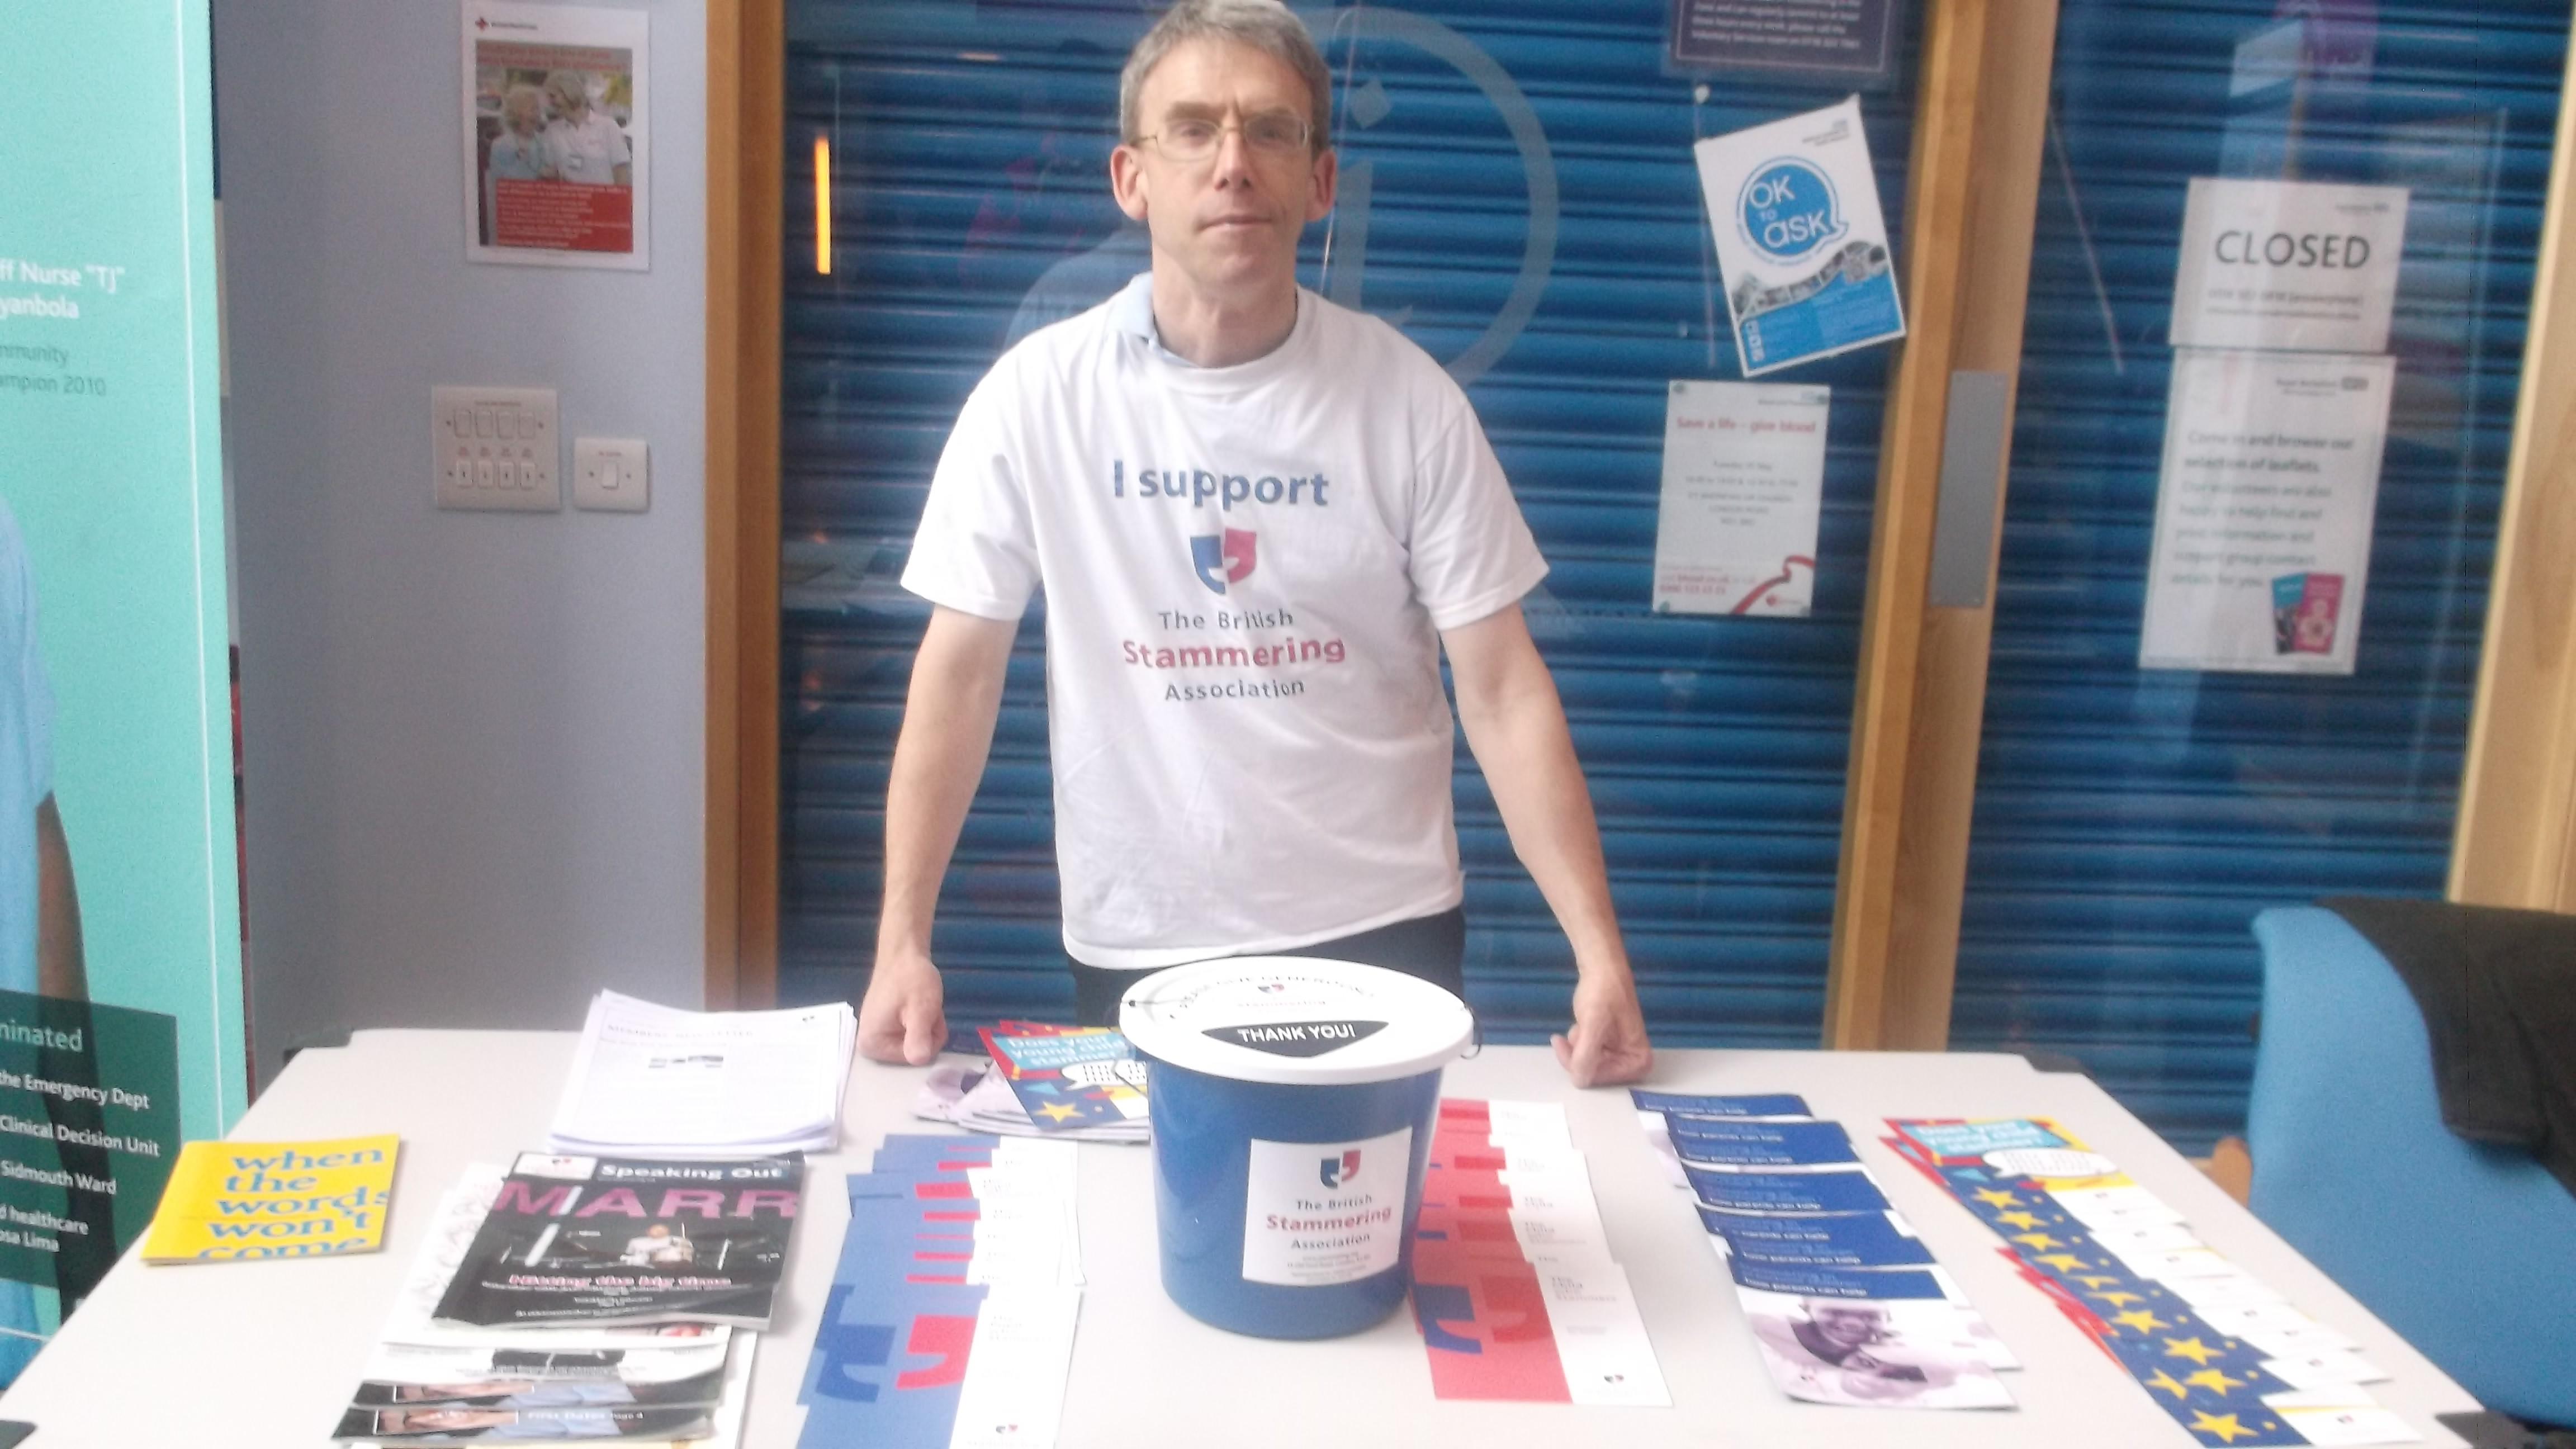 John Russell at an information stand